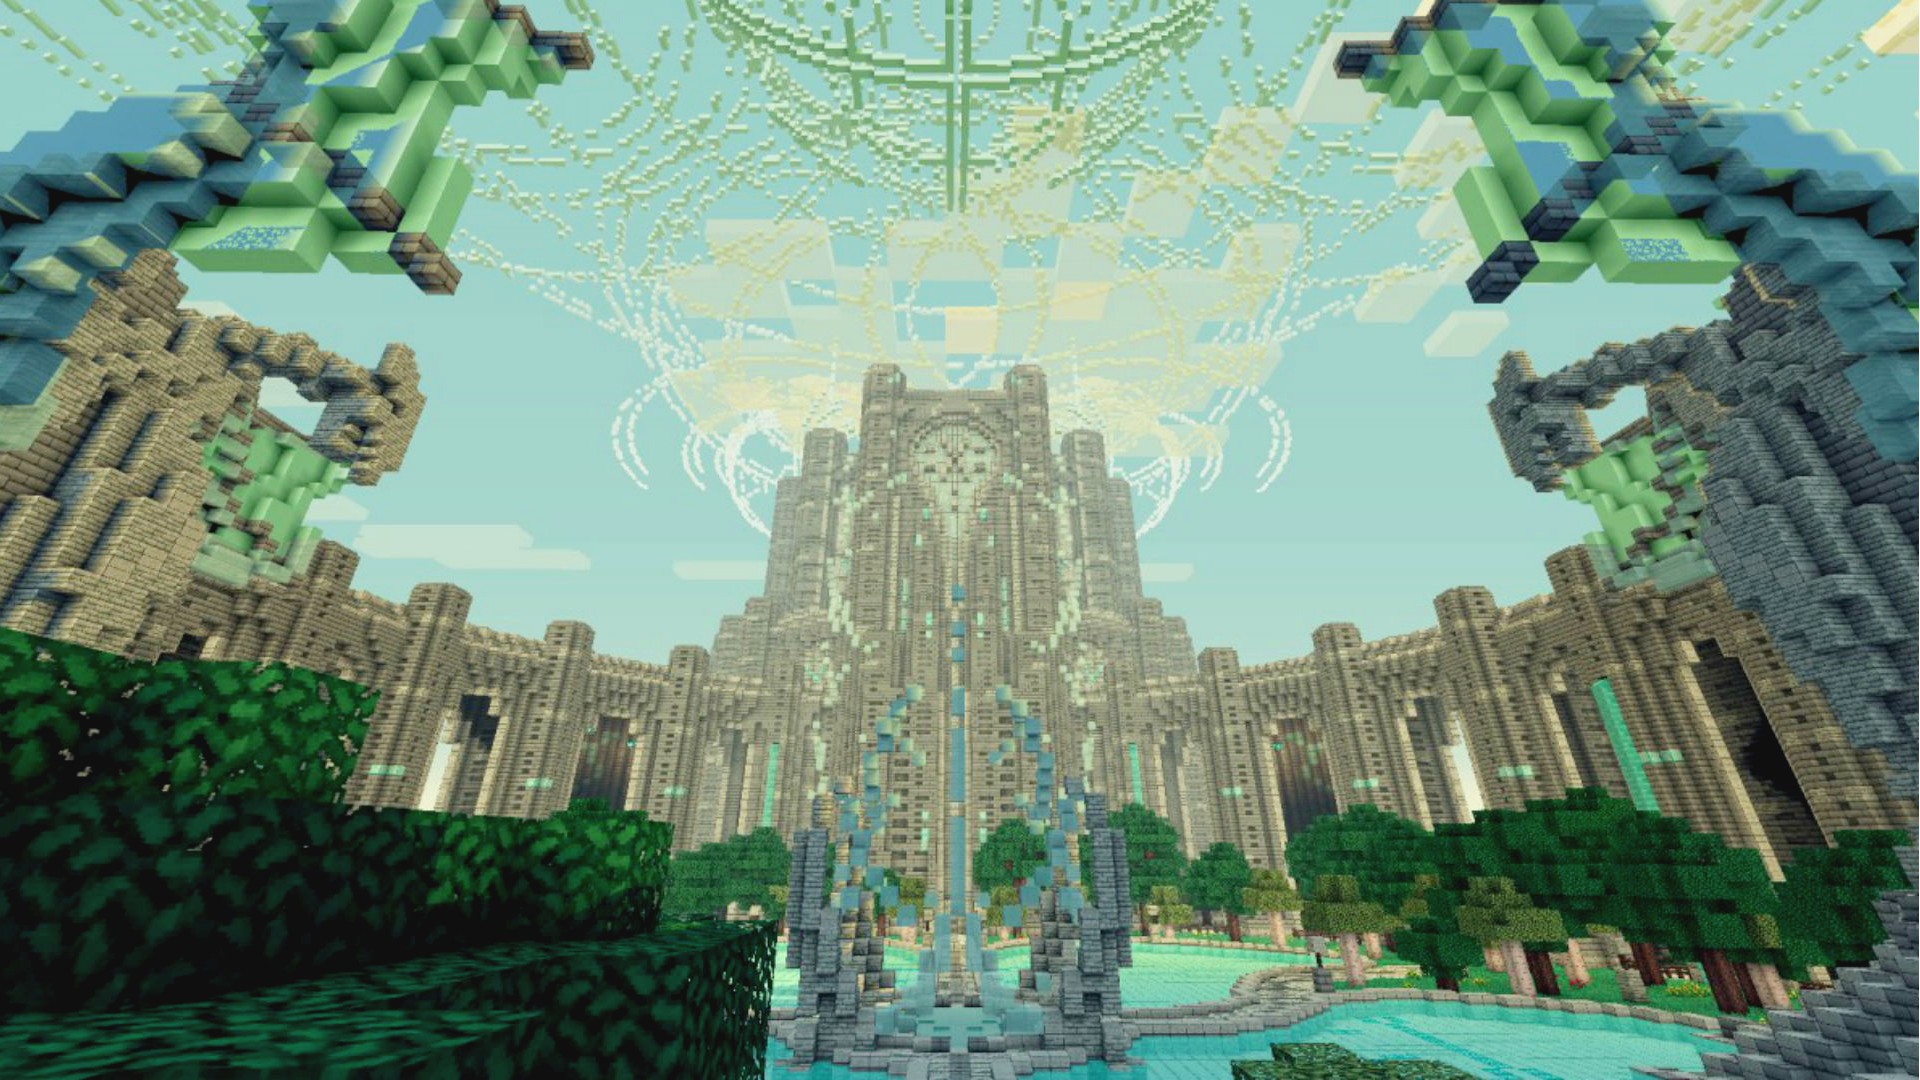 Minecraft turns 10: The five most epic builds in the game's history